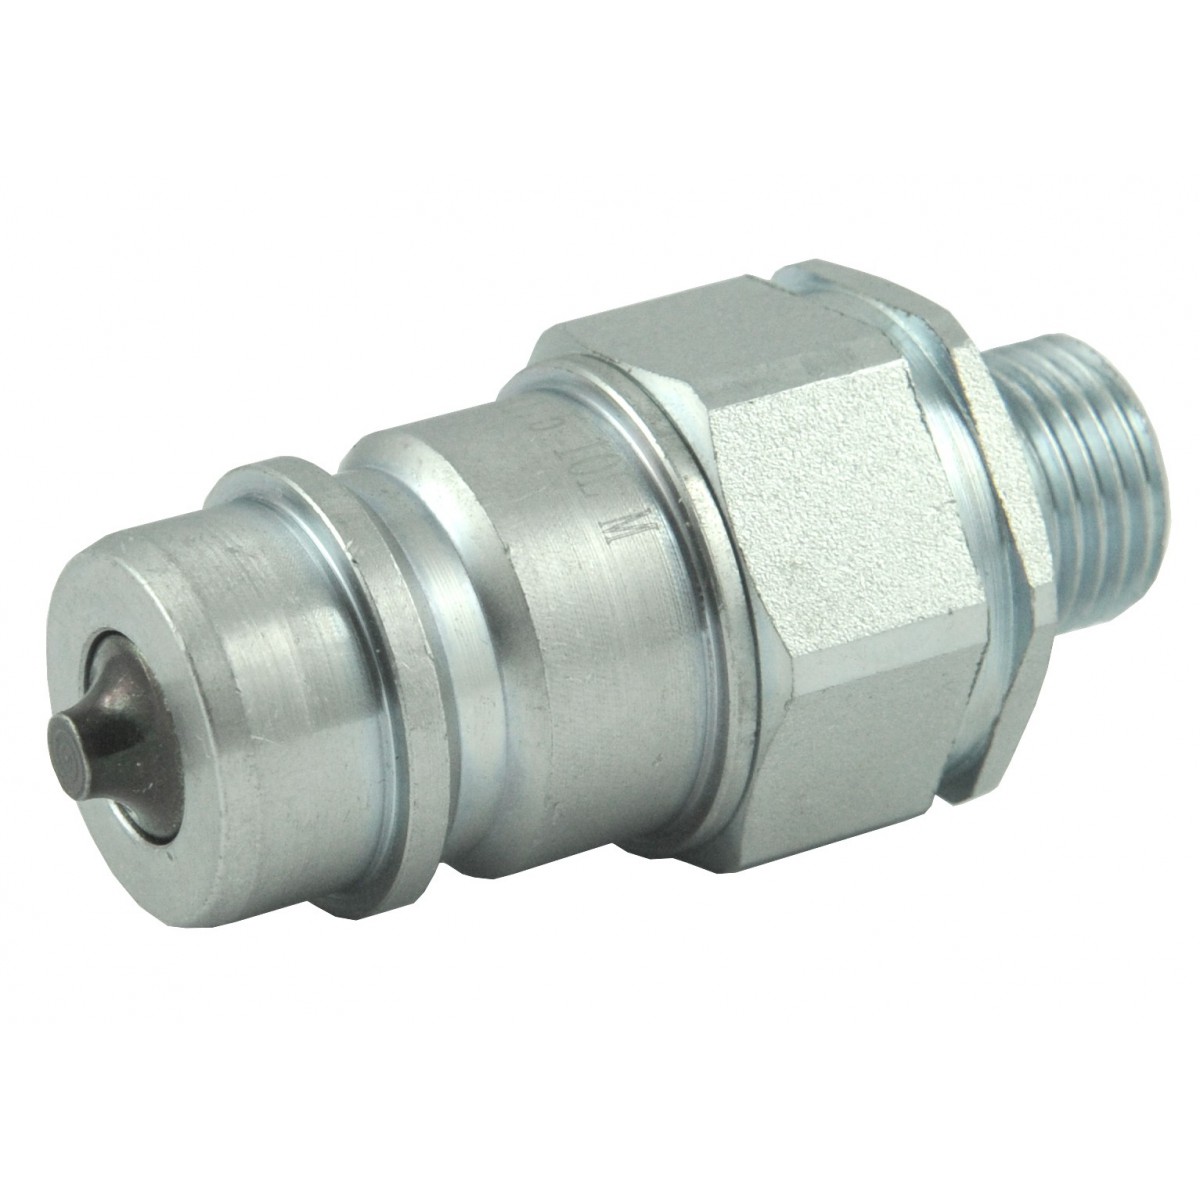 Hydraulic connector M18X1.5 10 L EURO ISO12.5 plug socket QUICK CONNECTOR